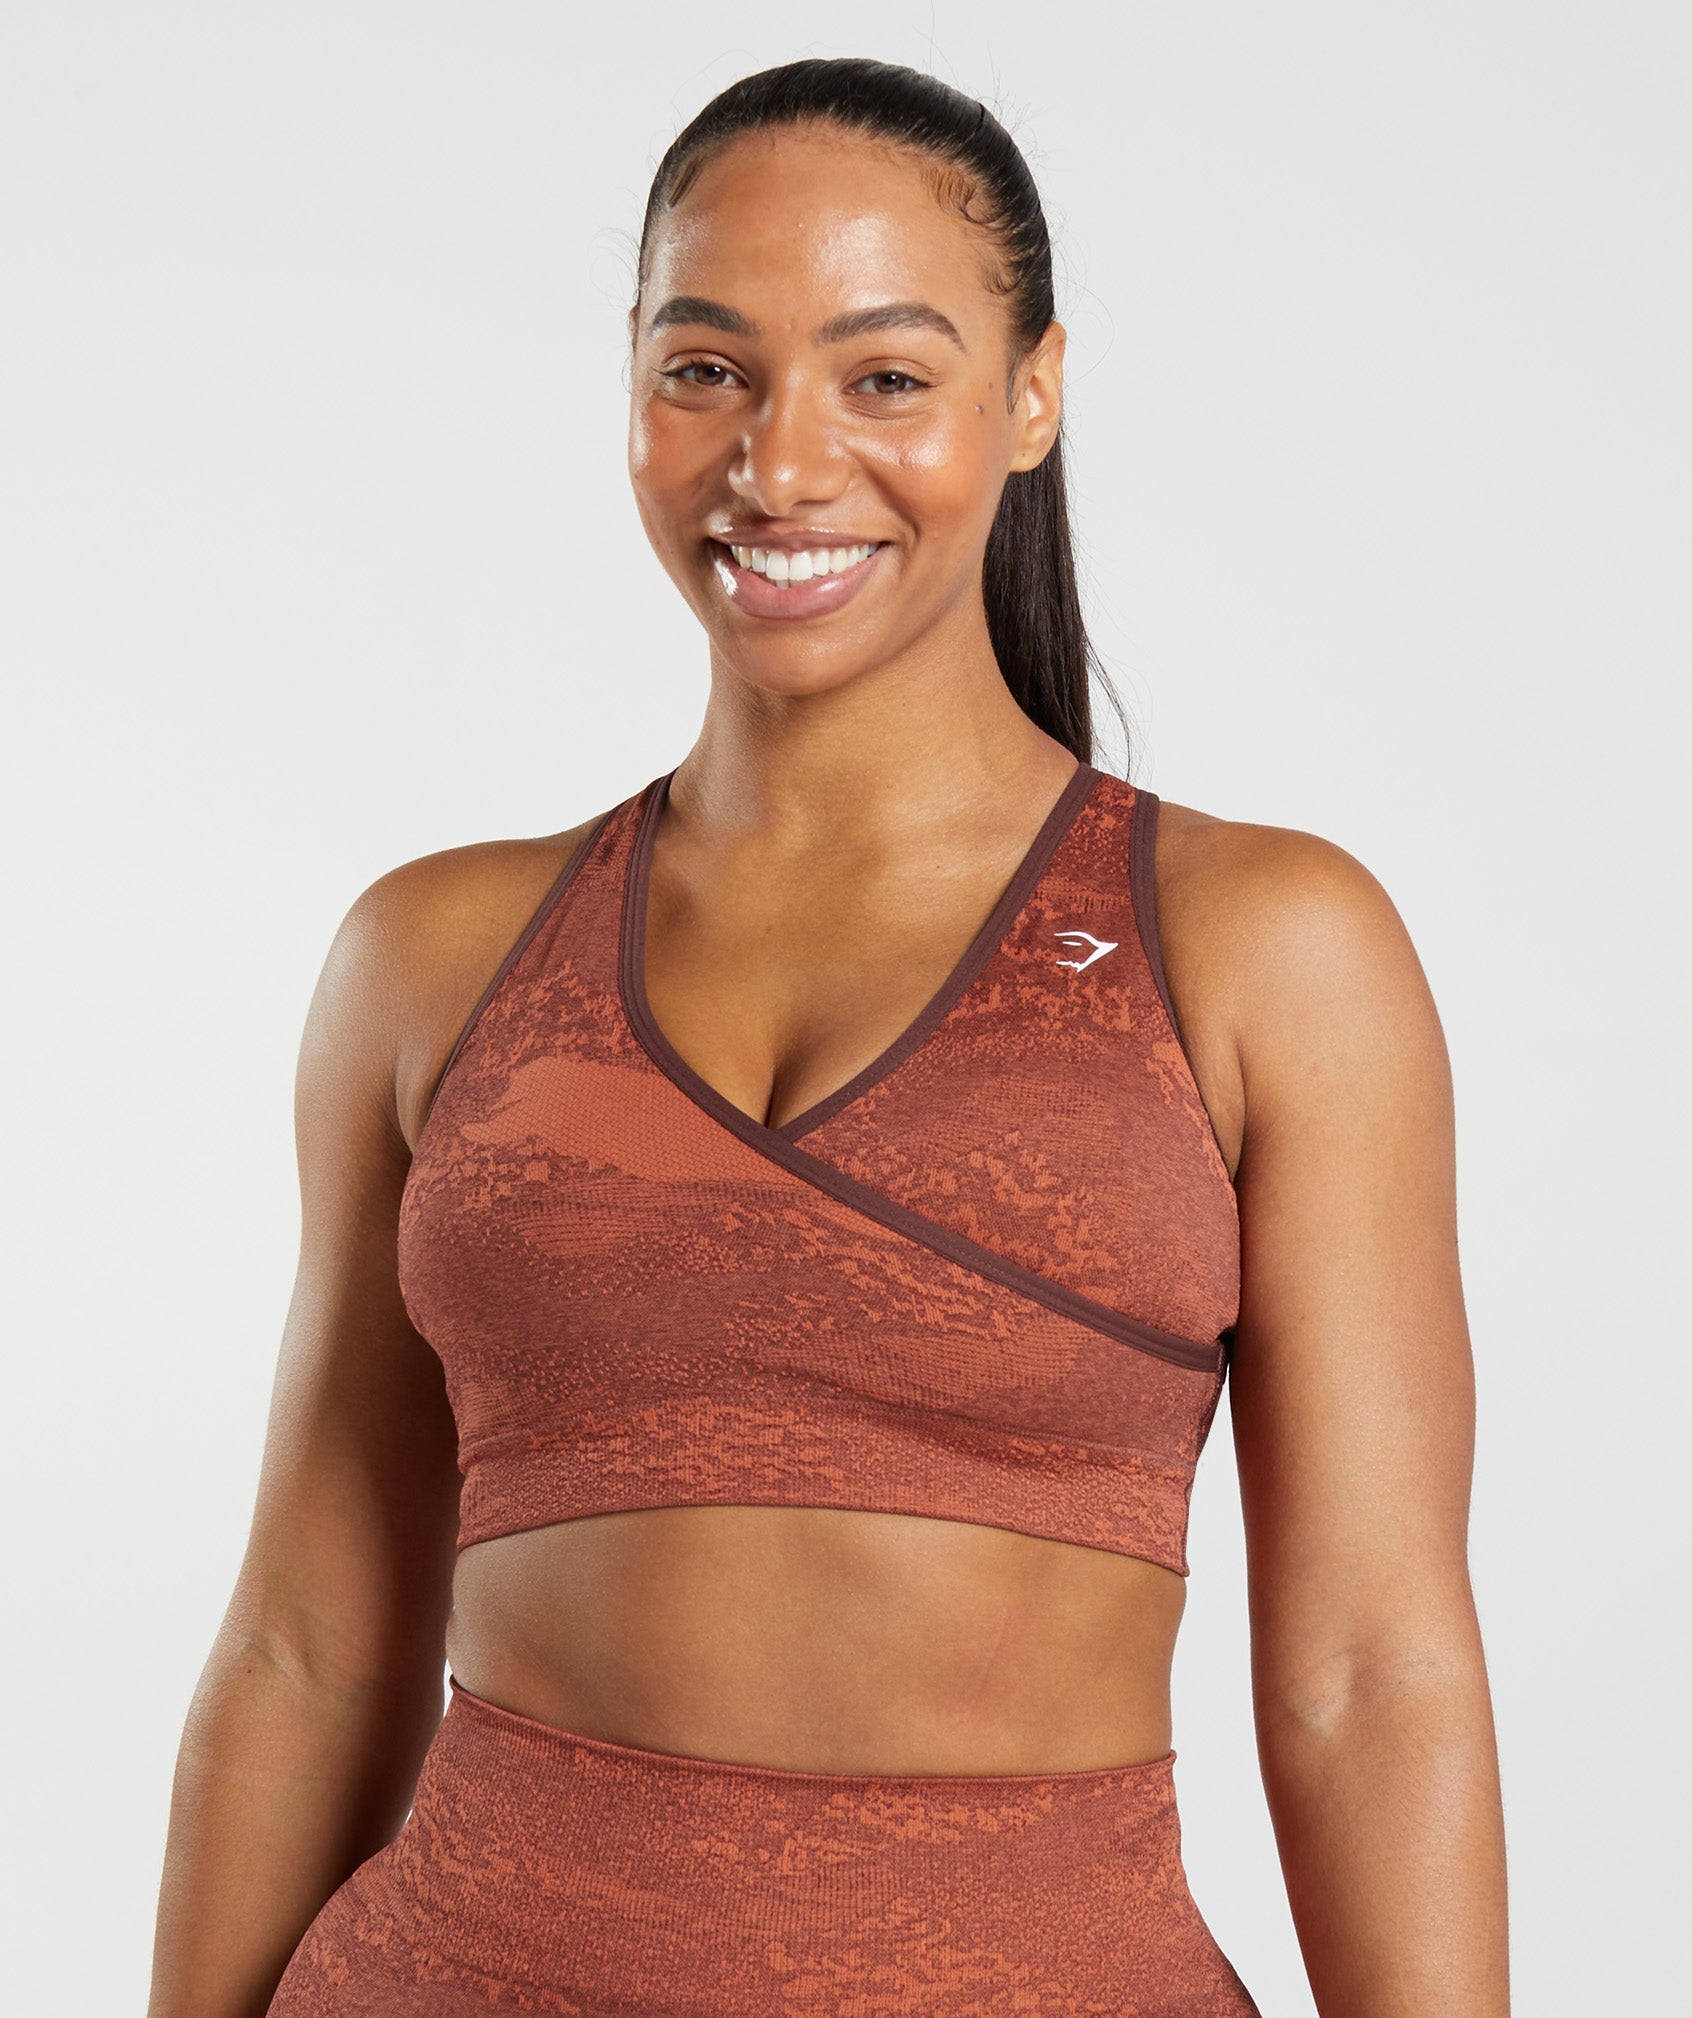 Cut Out Bra - Maroon Sports Bra with Front Cut Out - Maroon Sports